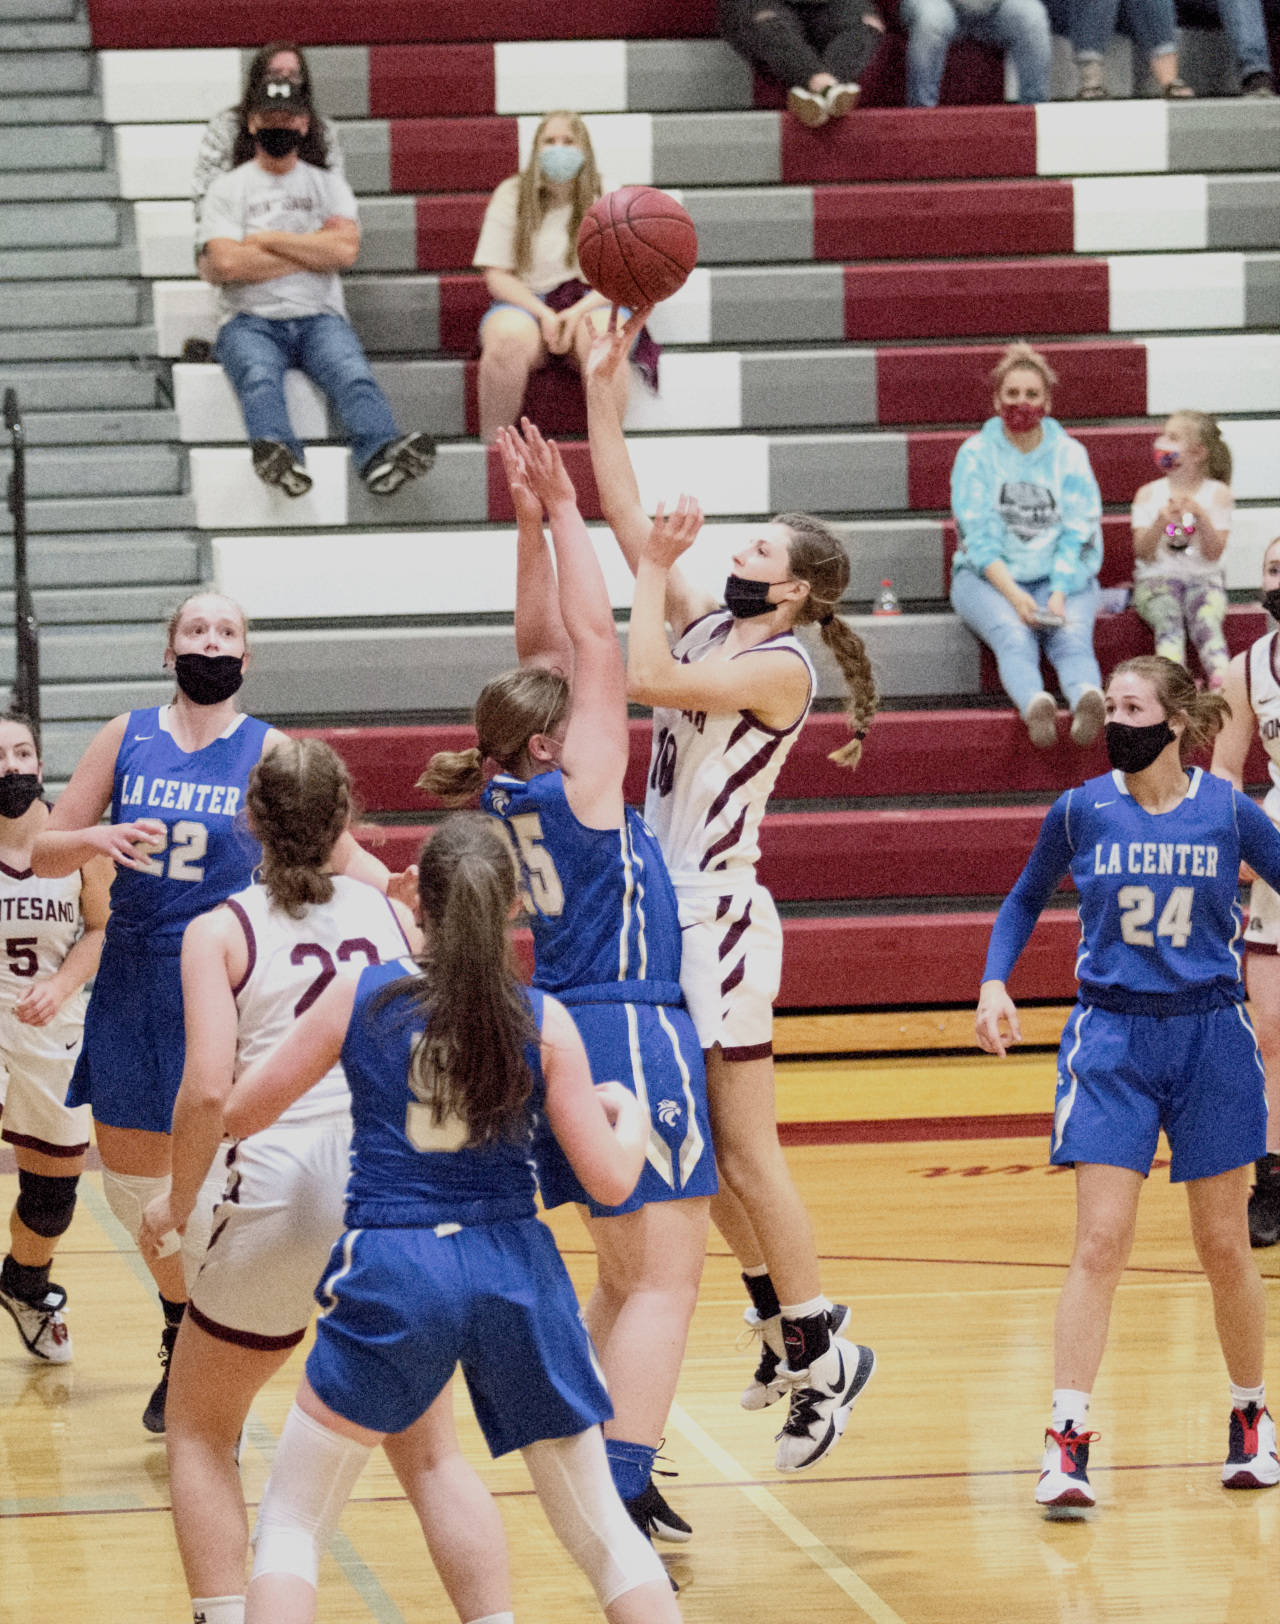 RYAN SPARKS/THE DAILY WORLD
Montesano freshman Mikayla Stanfield puts up a shot against La Center’s Malyah Cooley during the Bulldogs’ 56-50 victory in a 1A District 4 semifinal matchup Thursday in Montesano.